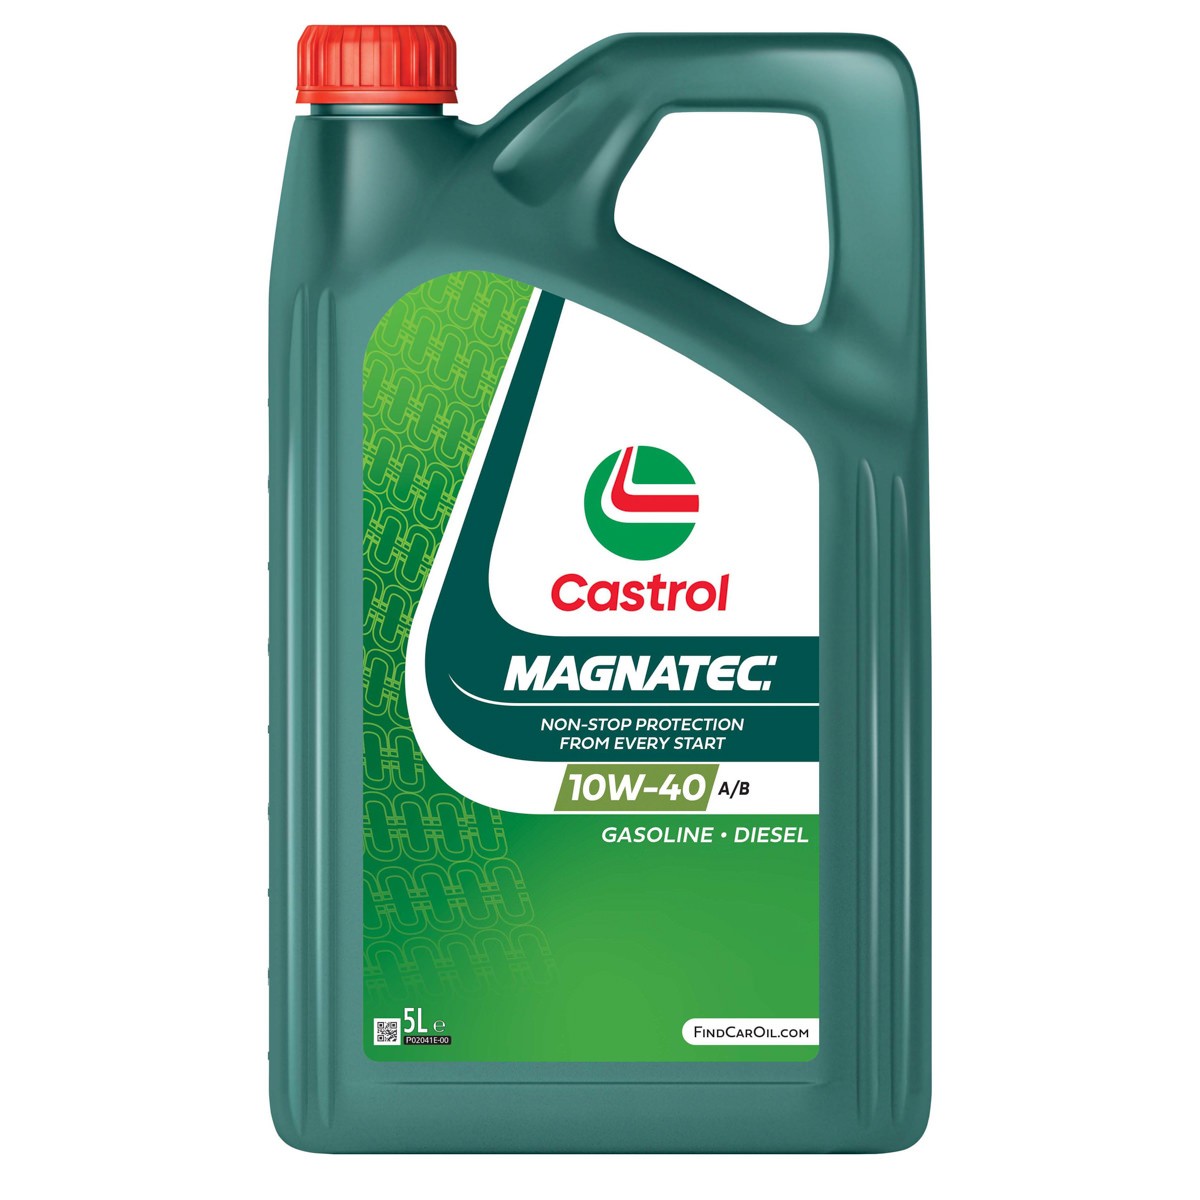 5W-40, 5l, Part Synthetic Oil from CASTROL - 15F7D2